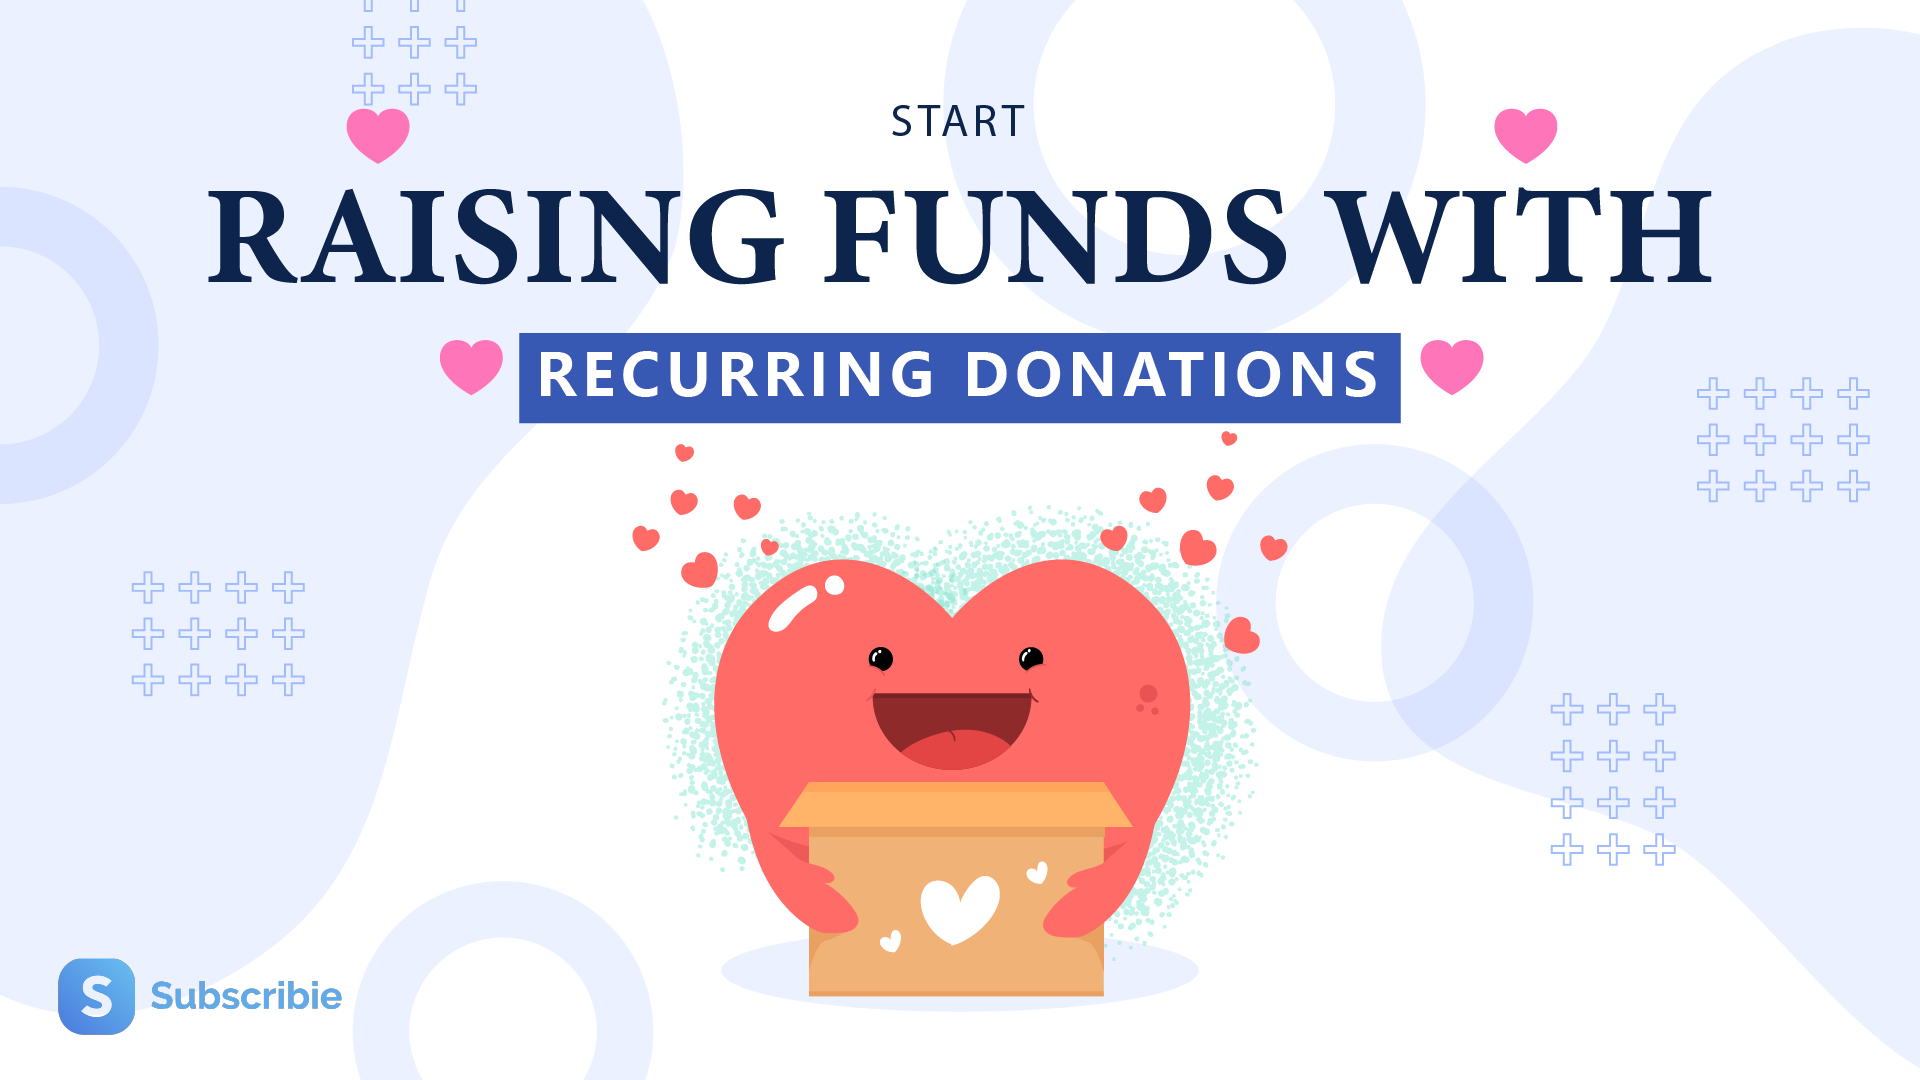 Why Recurring Donations help Charities Raise Funds